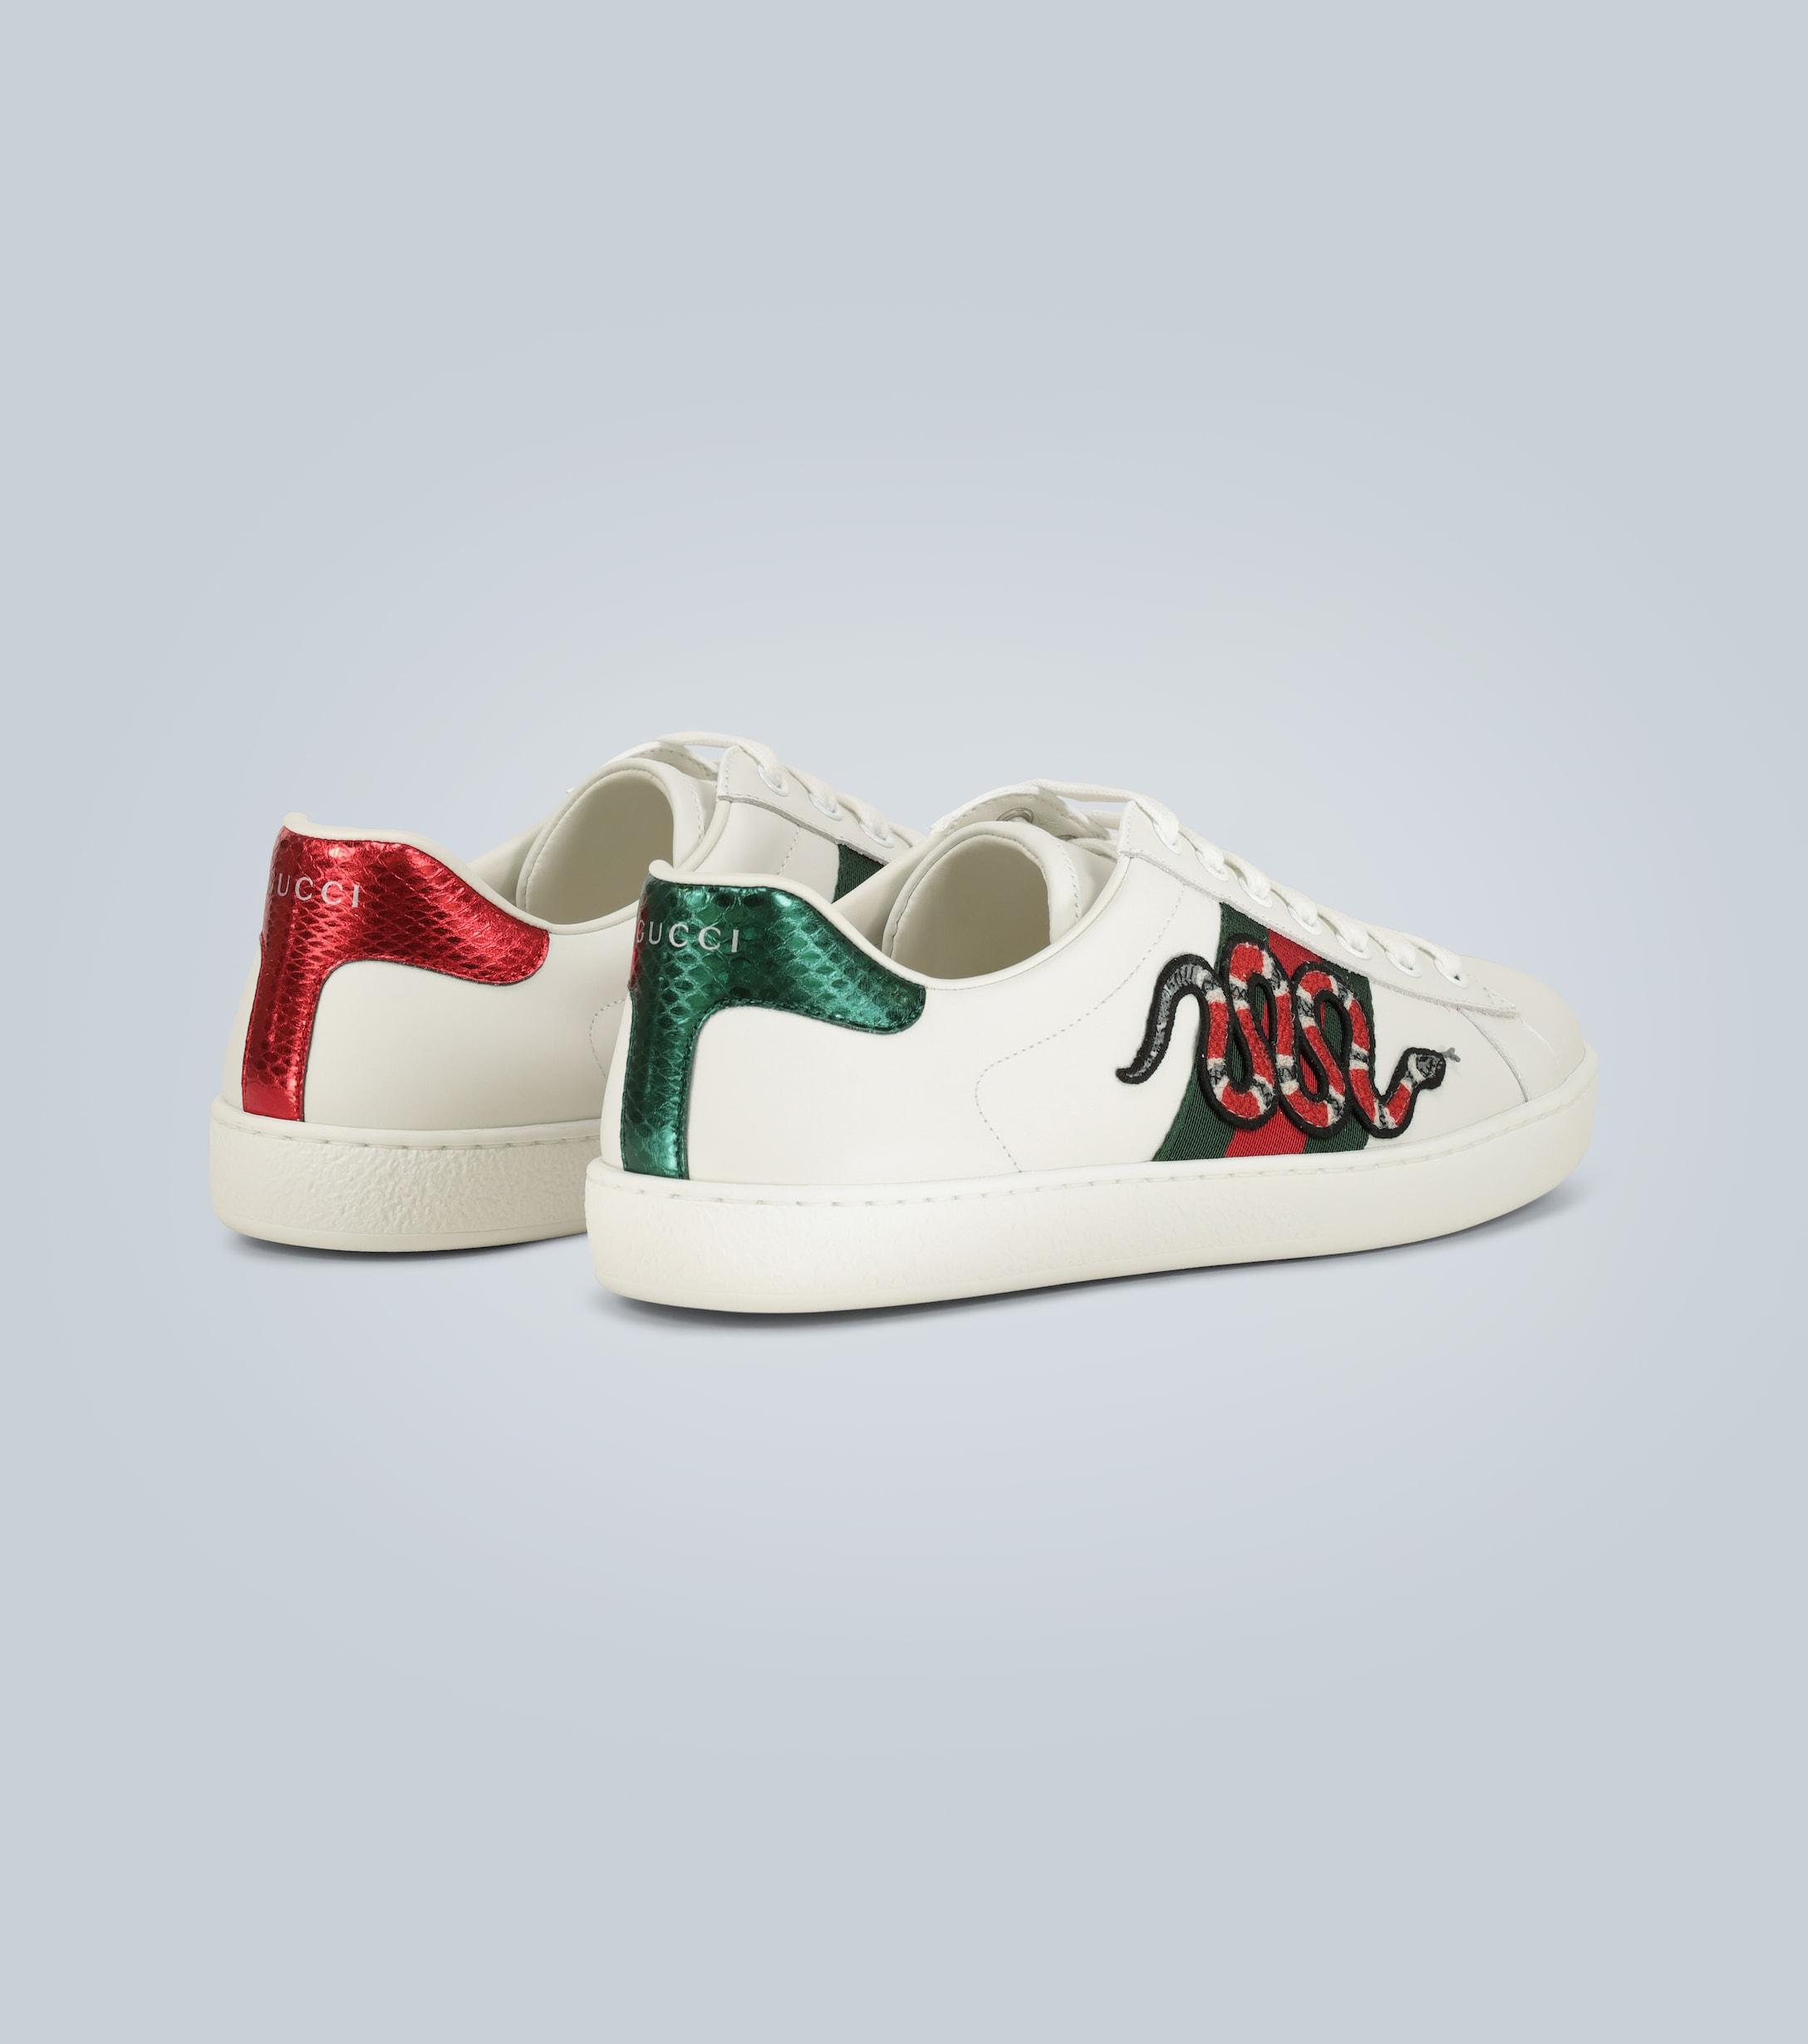 shoes gucci snake